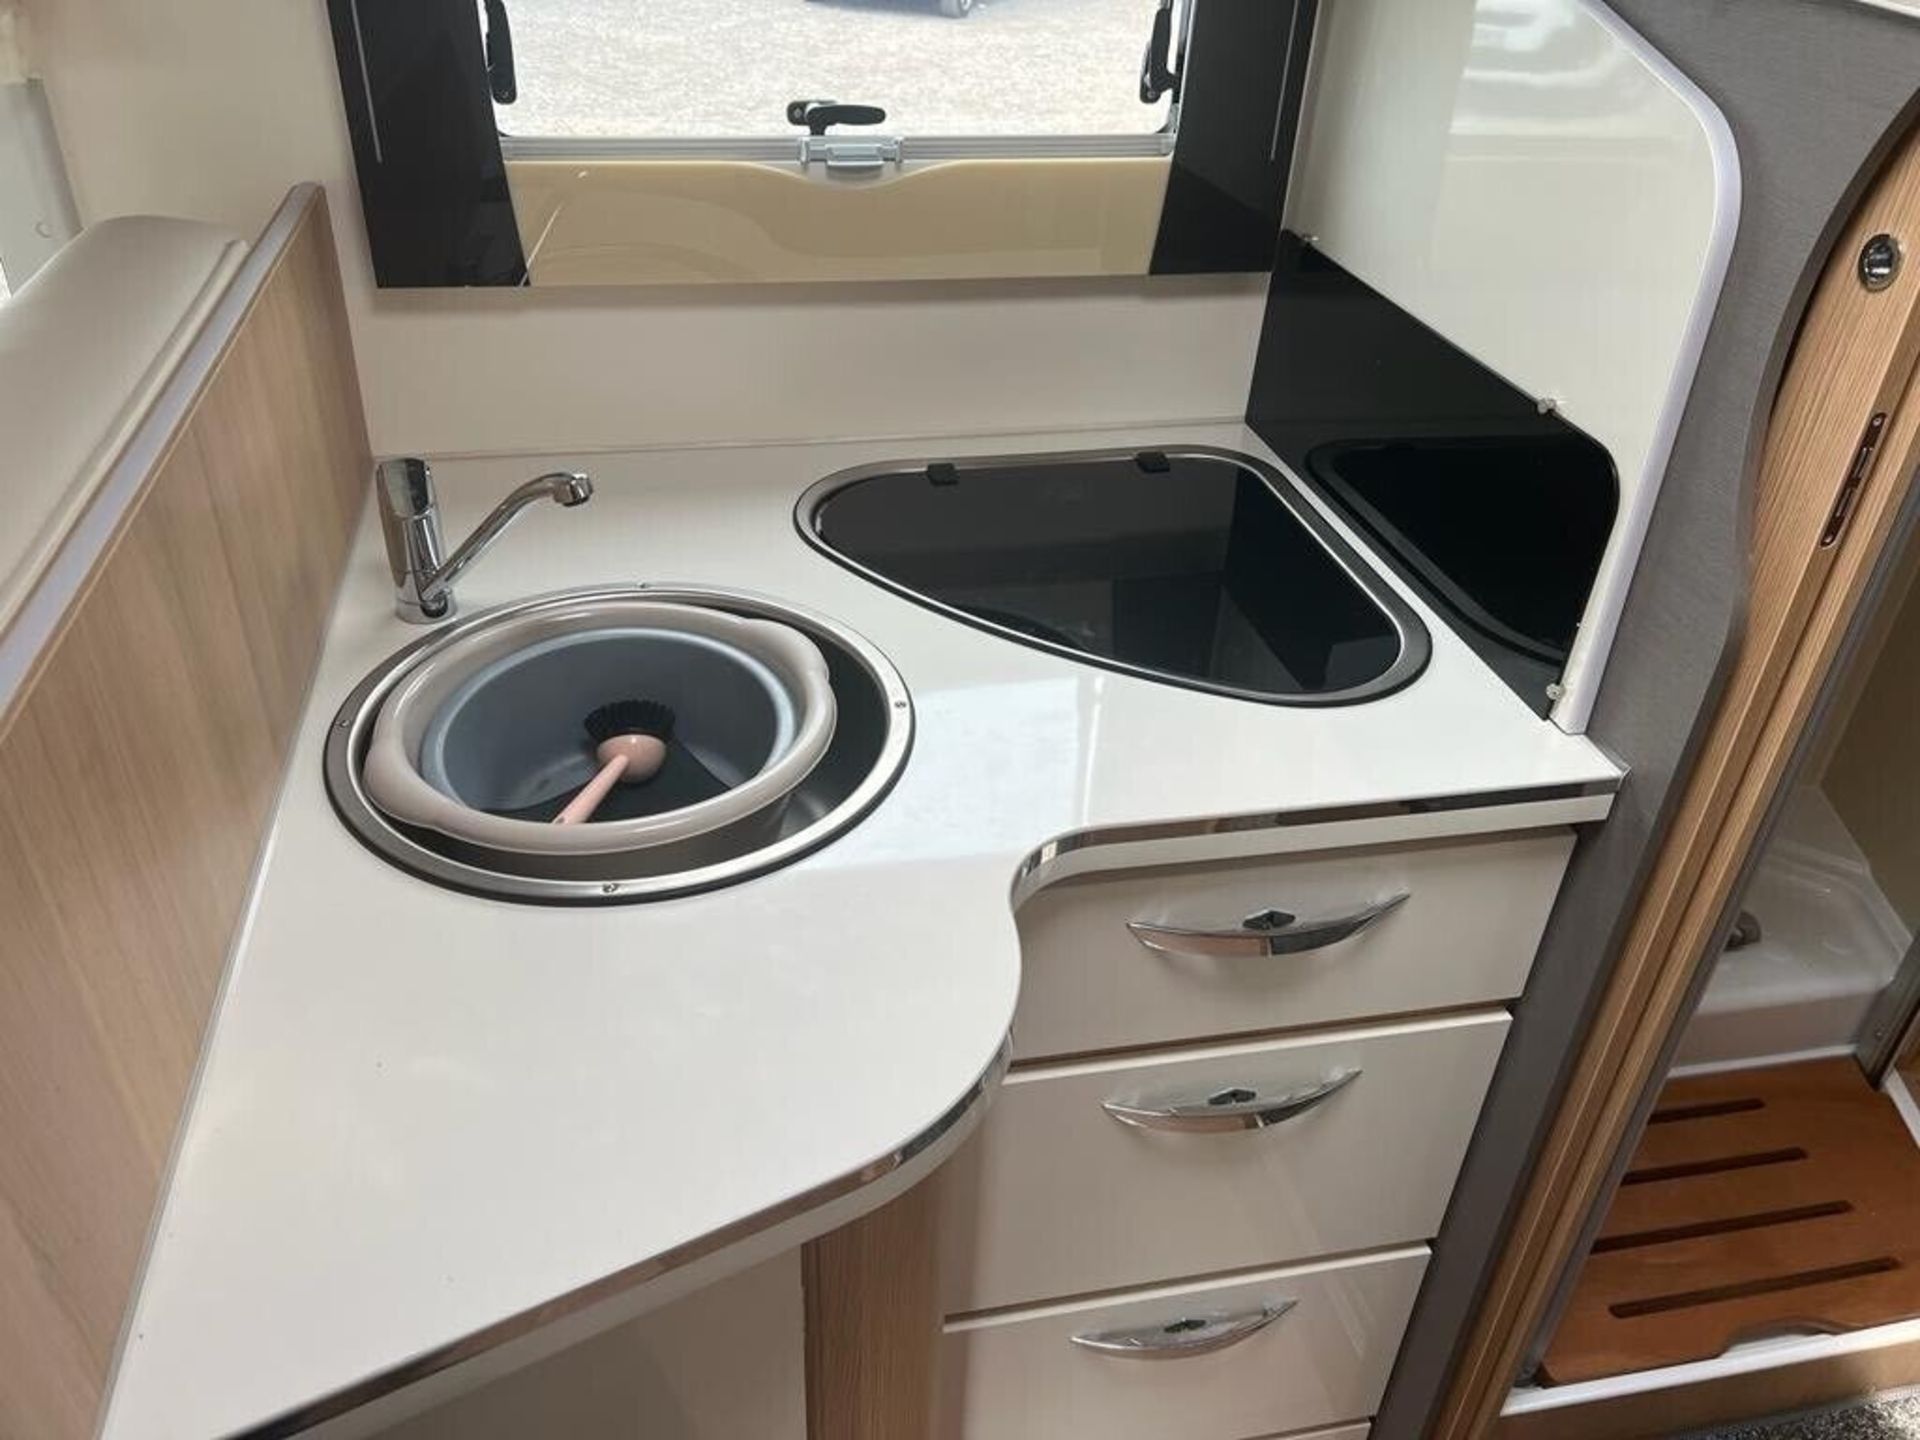 72 PLATE - ONLY 750 MILES! FIAT MCLOUIS FUSION 367: IMMACULATE MOTORHOME JOY >NO VAT ON HAMMER< - Image 8 of 15